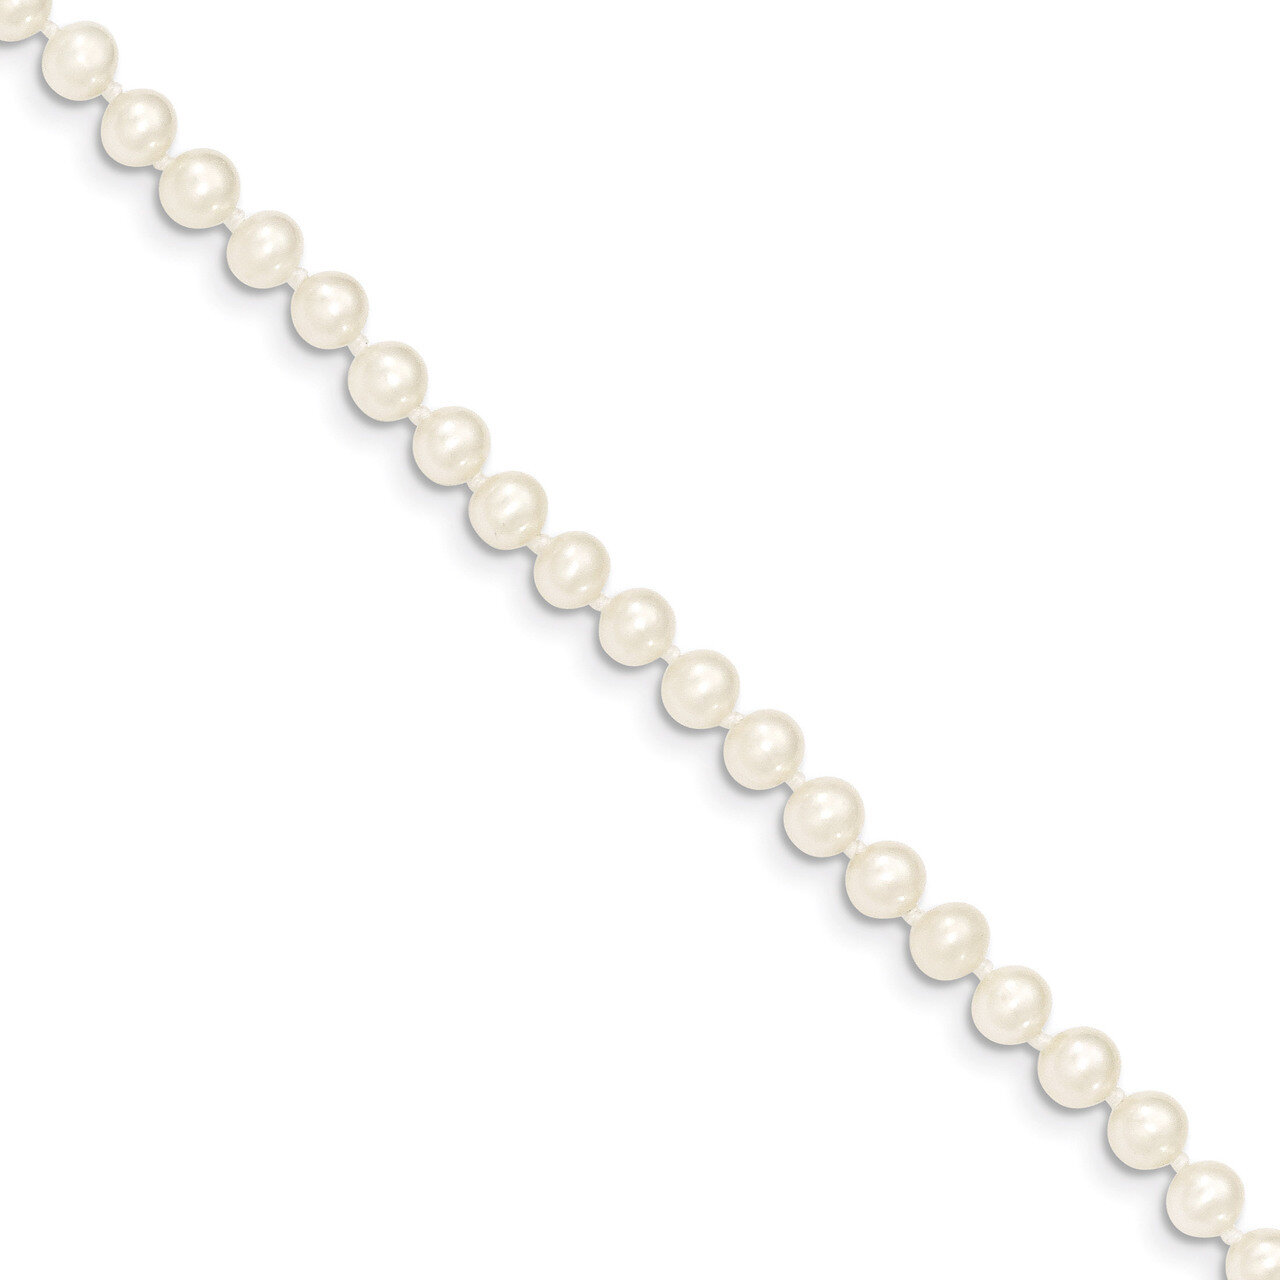 4-5mm White Cultured Near Round Pearl Necklace 16 Inch 14k Gold WPN040-16